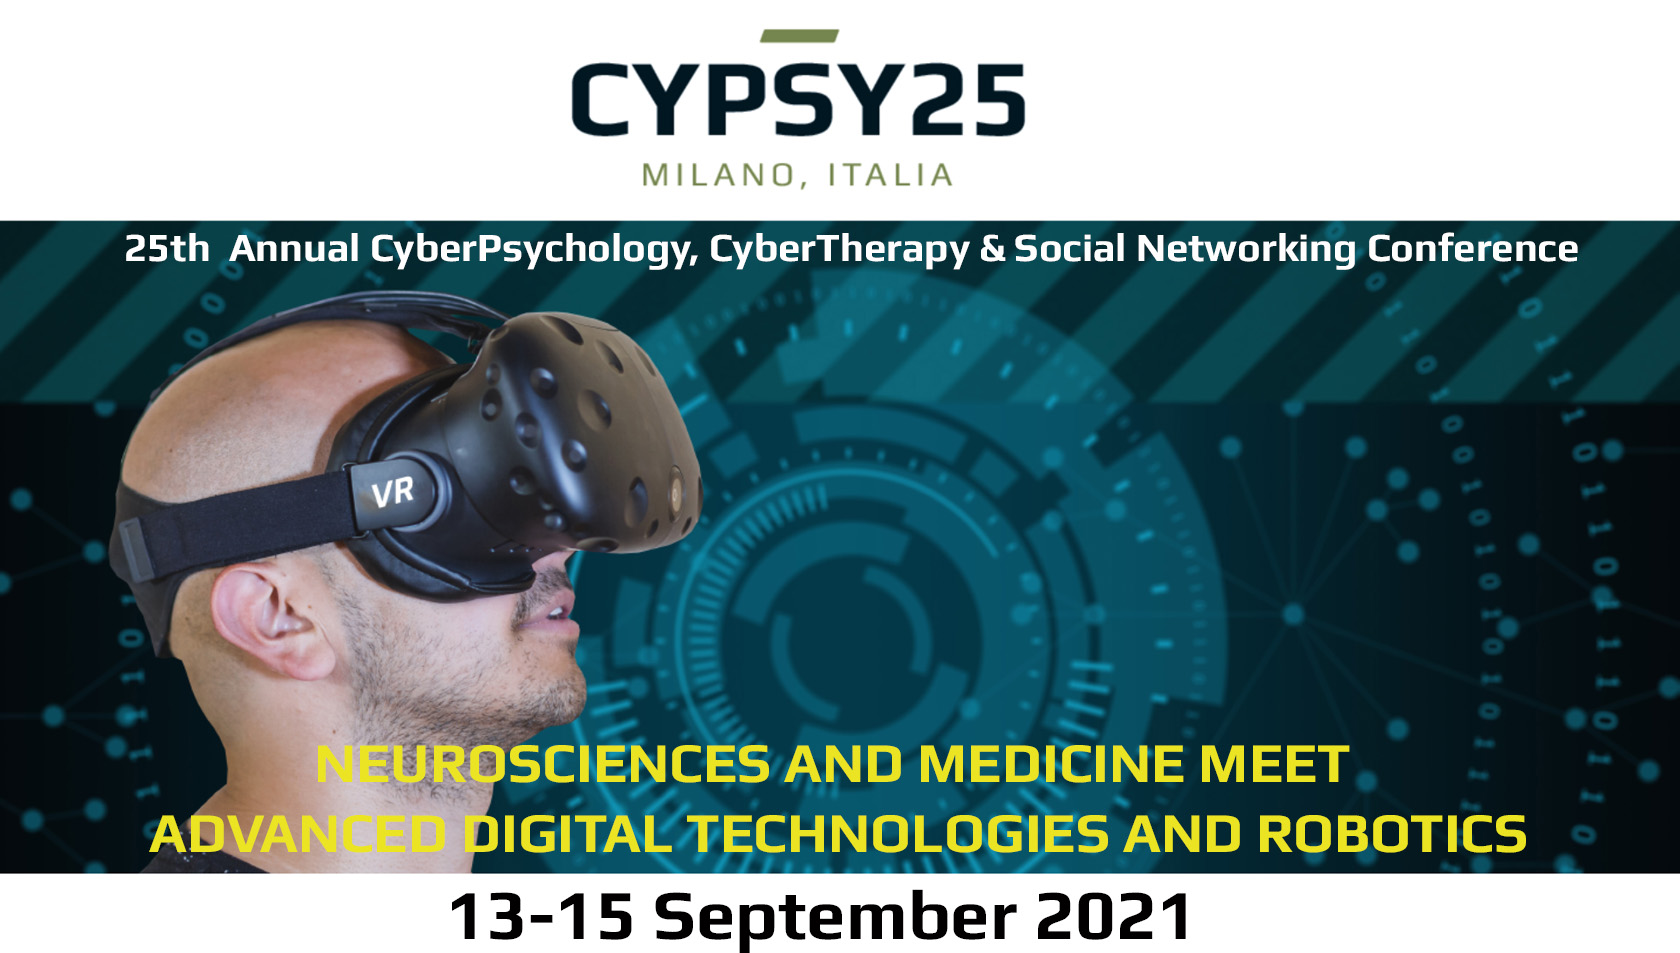 CYPSY25: 25th Annual CyberPsychology, CyberTherapy & Social Networking Conference